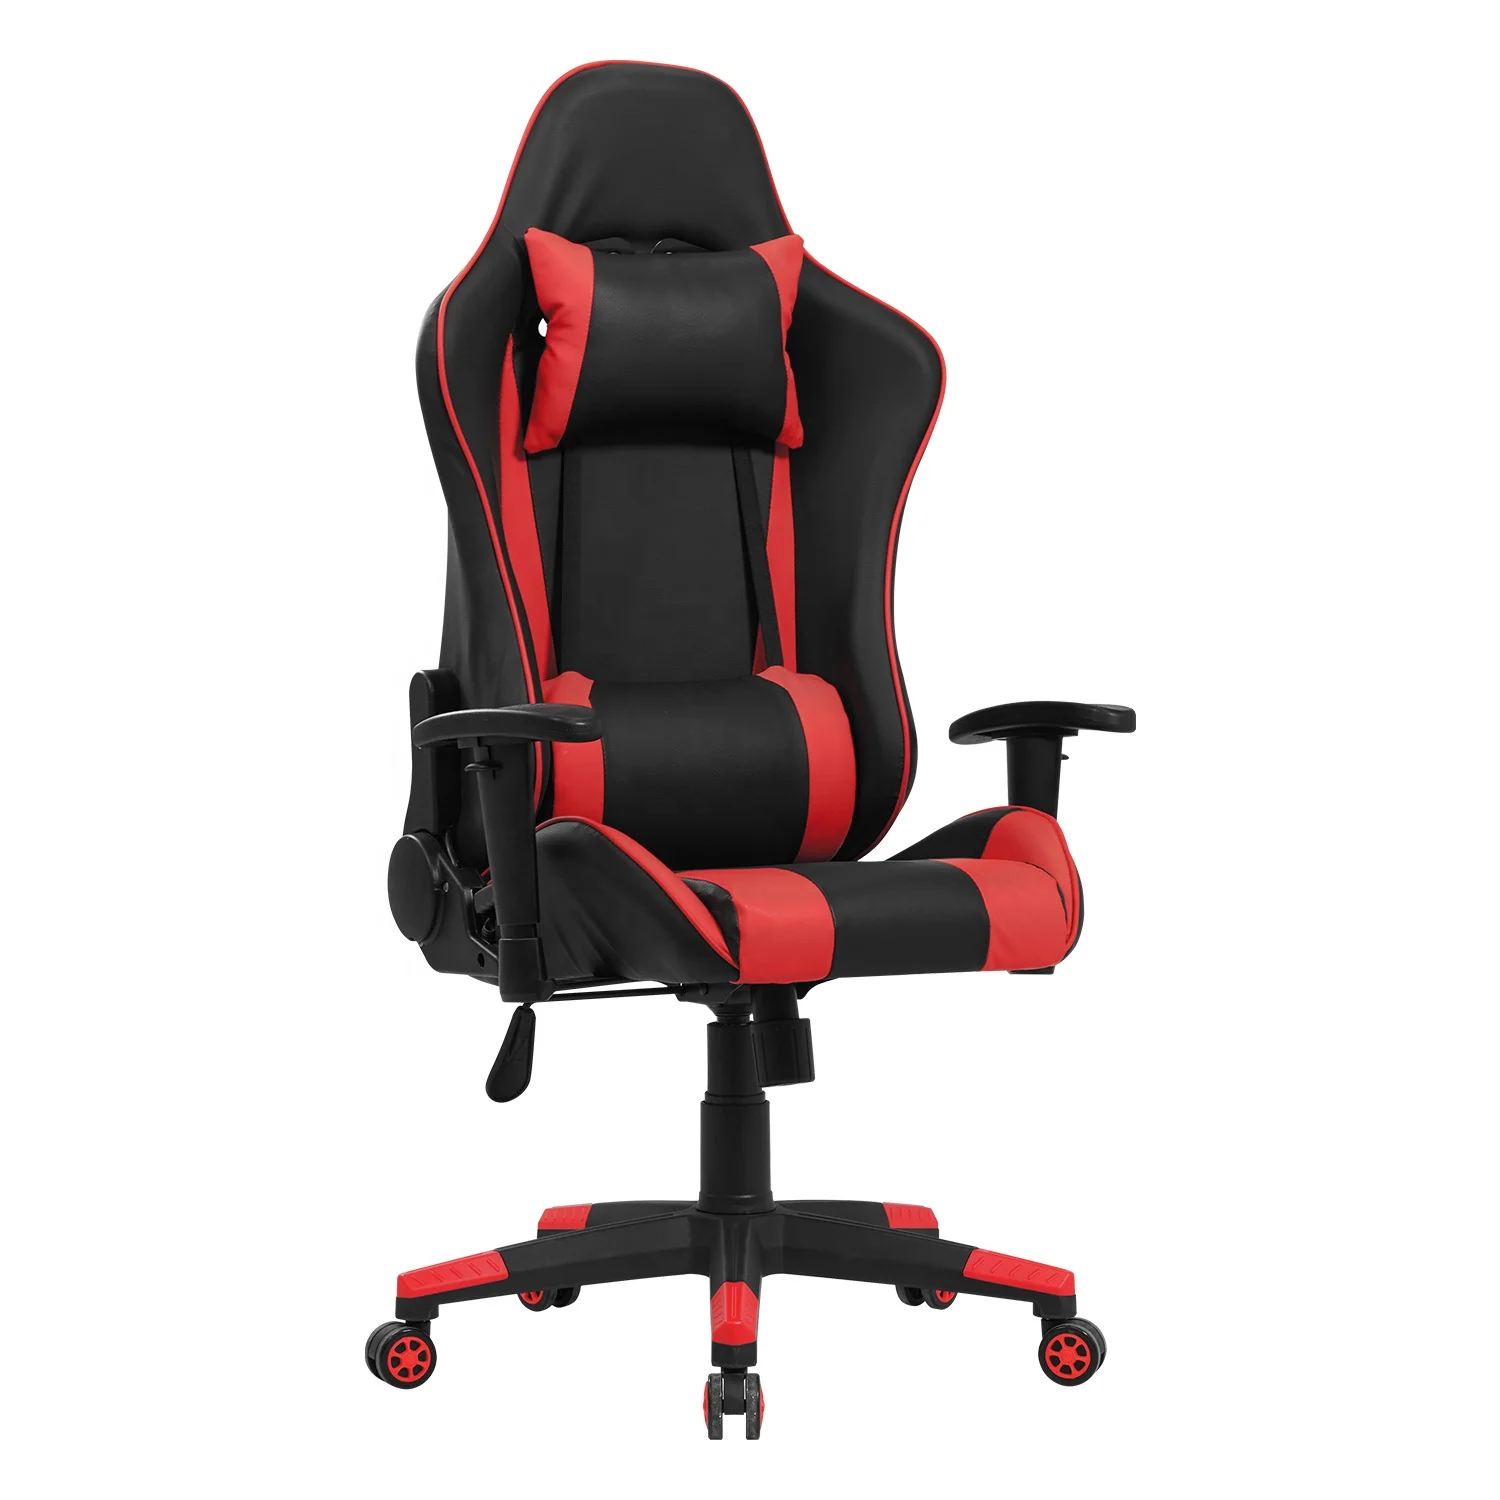 Swivel Gamer Chairs Home Sillas Recline Function Office Chair With Footrest Silla  Gaming Chair - Buy Gaming Chair,Sillas De Escritorio,Sedia Gaming Product  on 